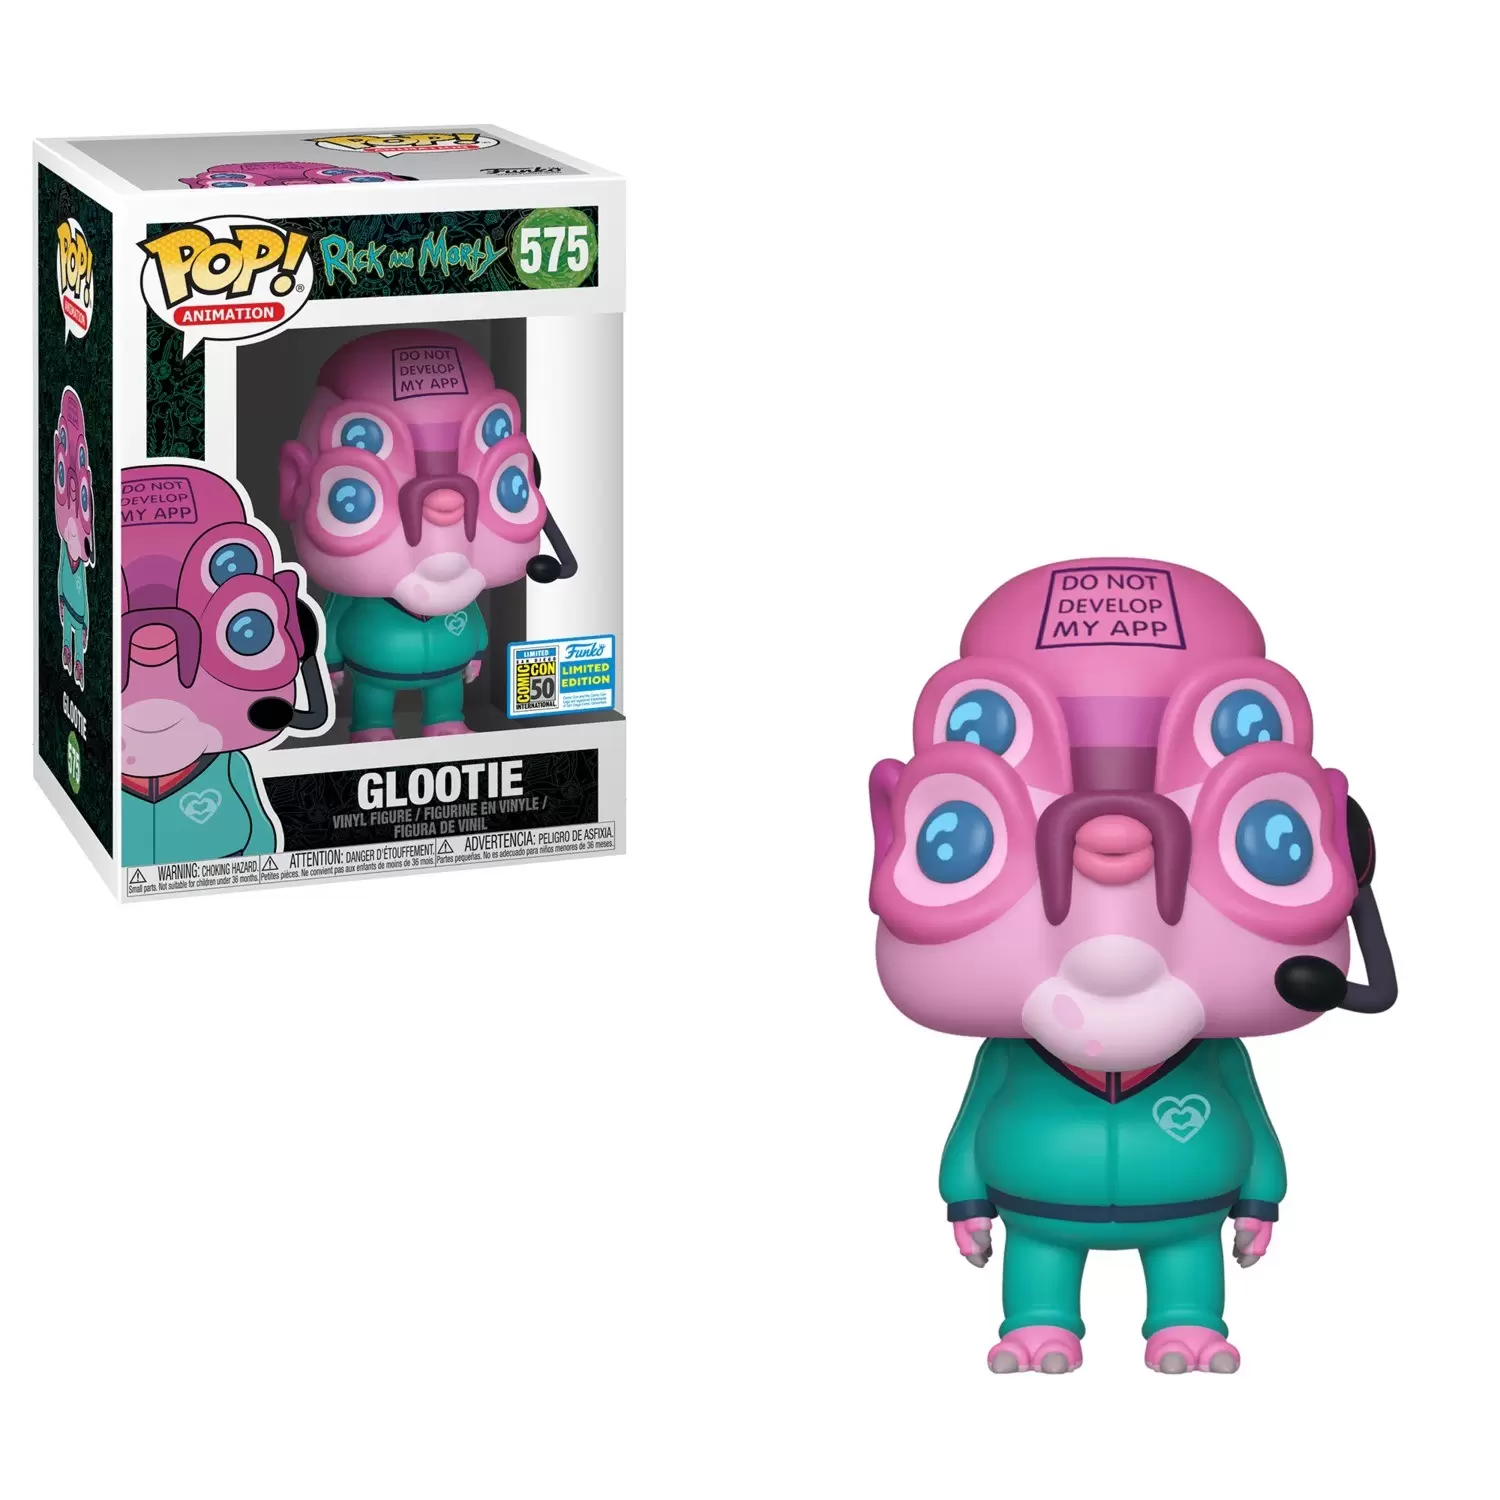 POP! Animation - Rick and Morty - Glootie